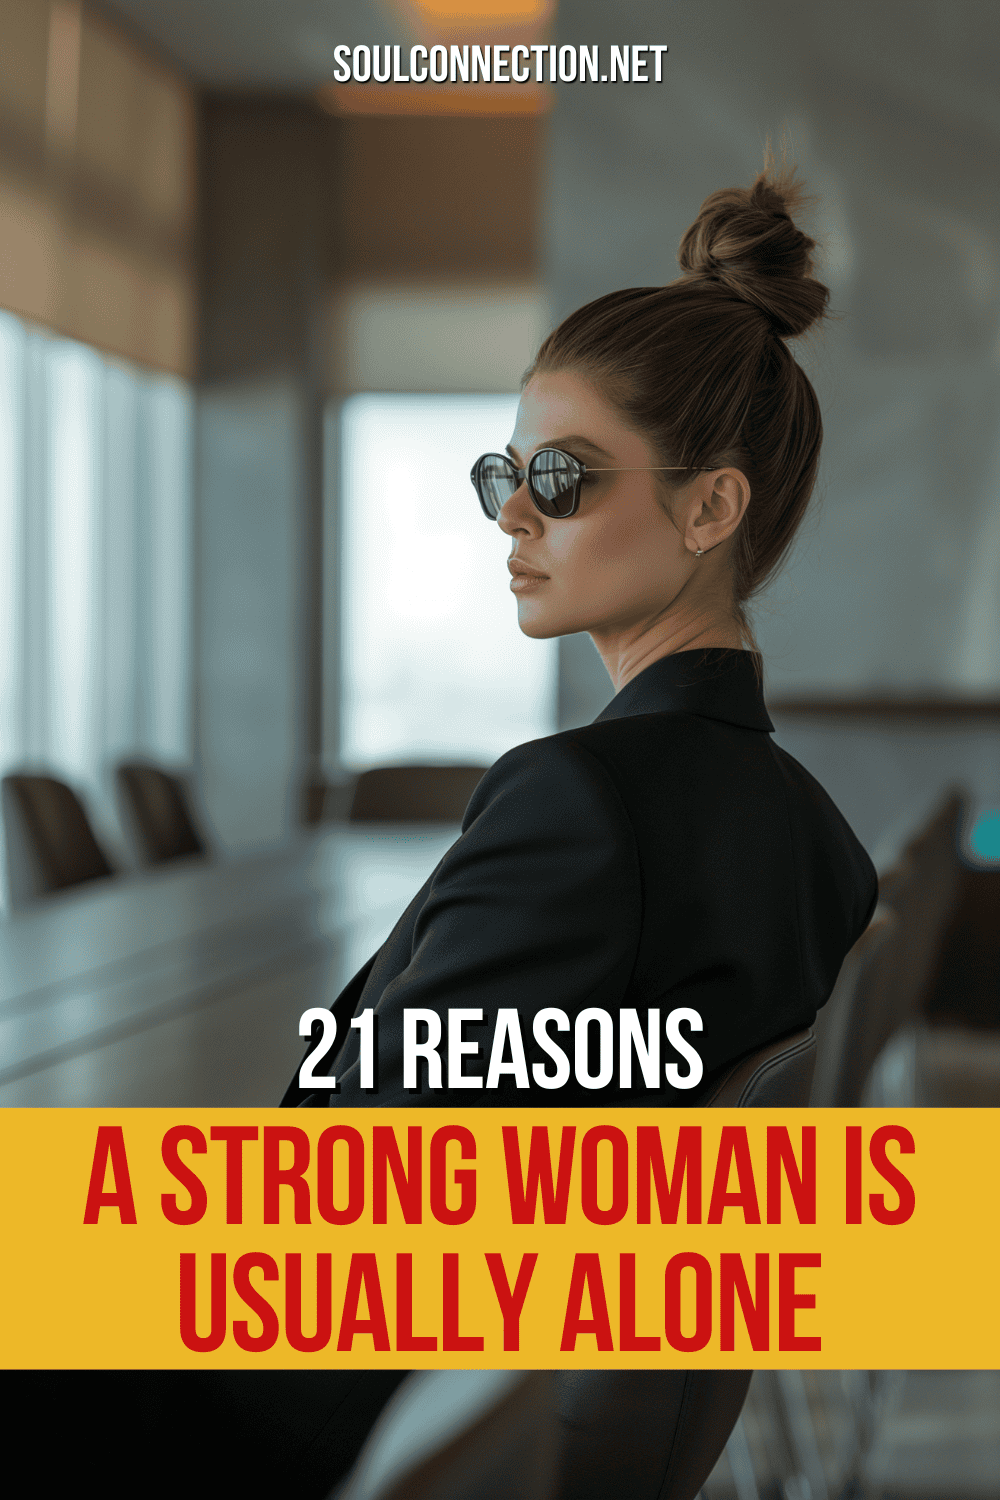 Strong, Independent Woman Alone - 21 Reasons Explained | SoulConnection.net